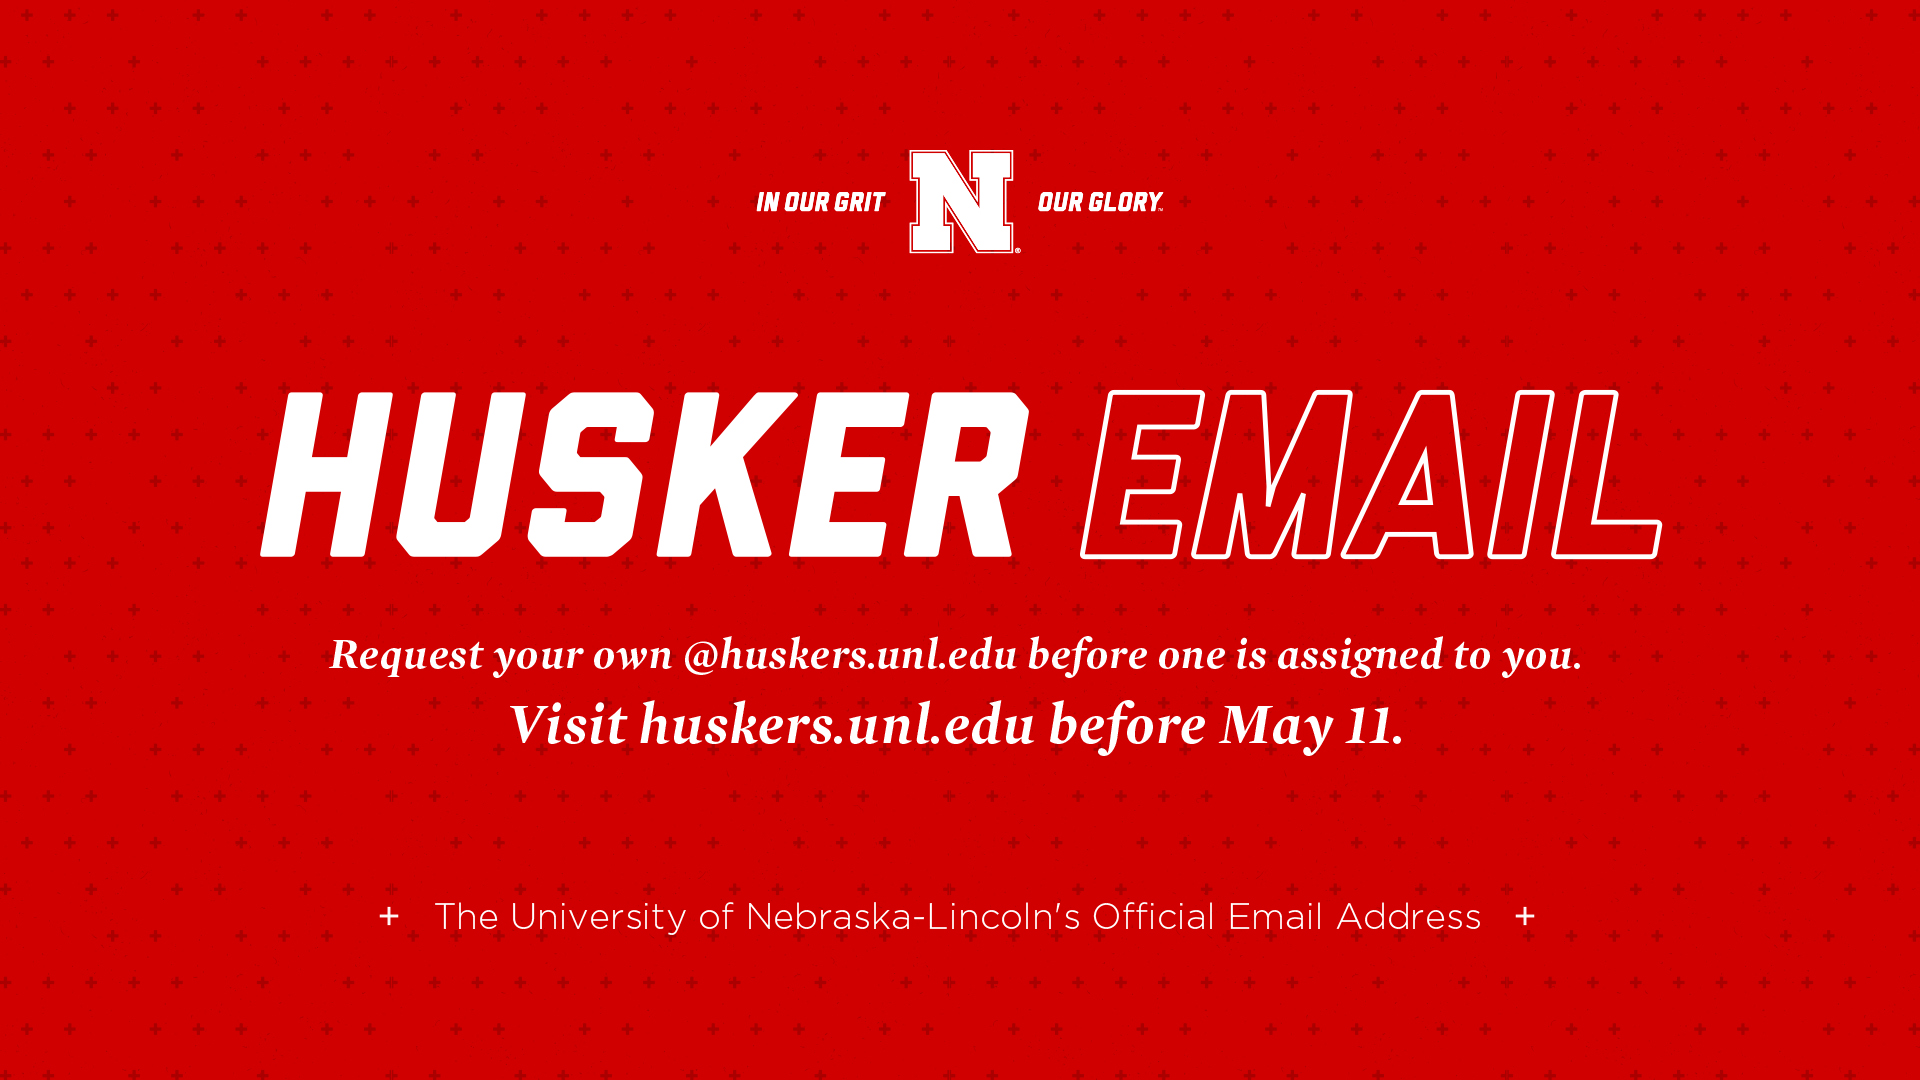 Students now have the opportunity to request their own @huskers.unl.edu email address before one is assigned to them. 